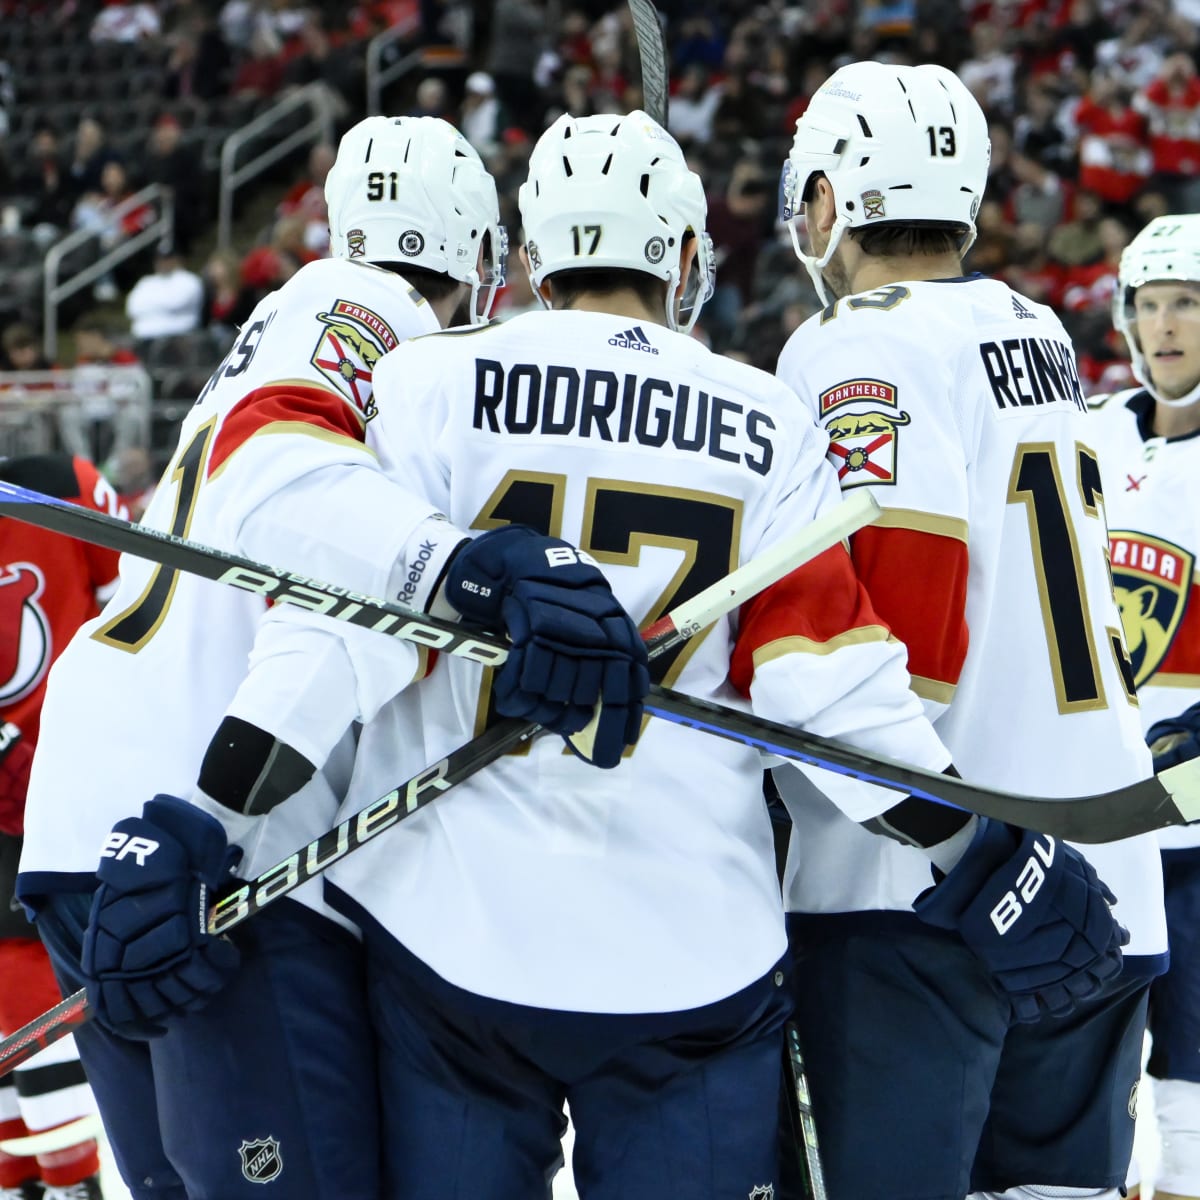 New Jersey Devils Post Seven Goals On Florida Panthers